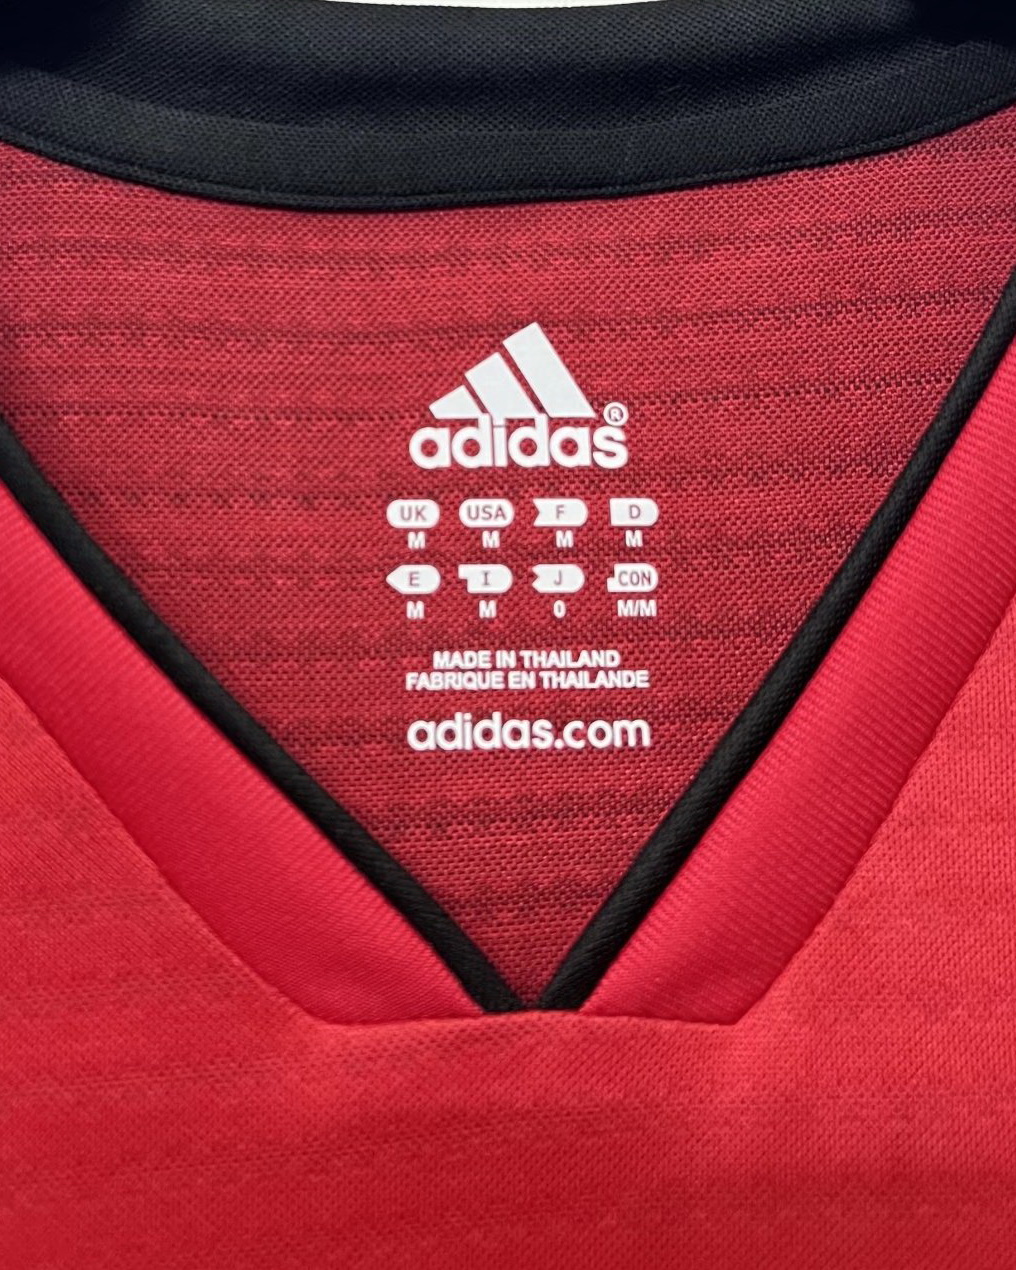 Manchester United 2018/19 Home Soccer Jersey